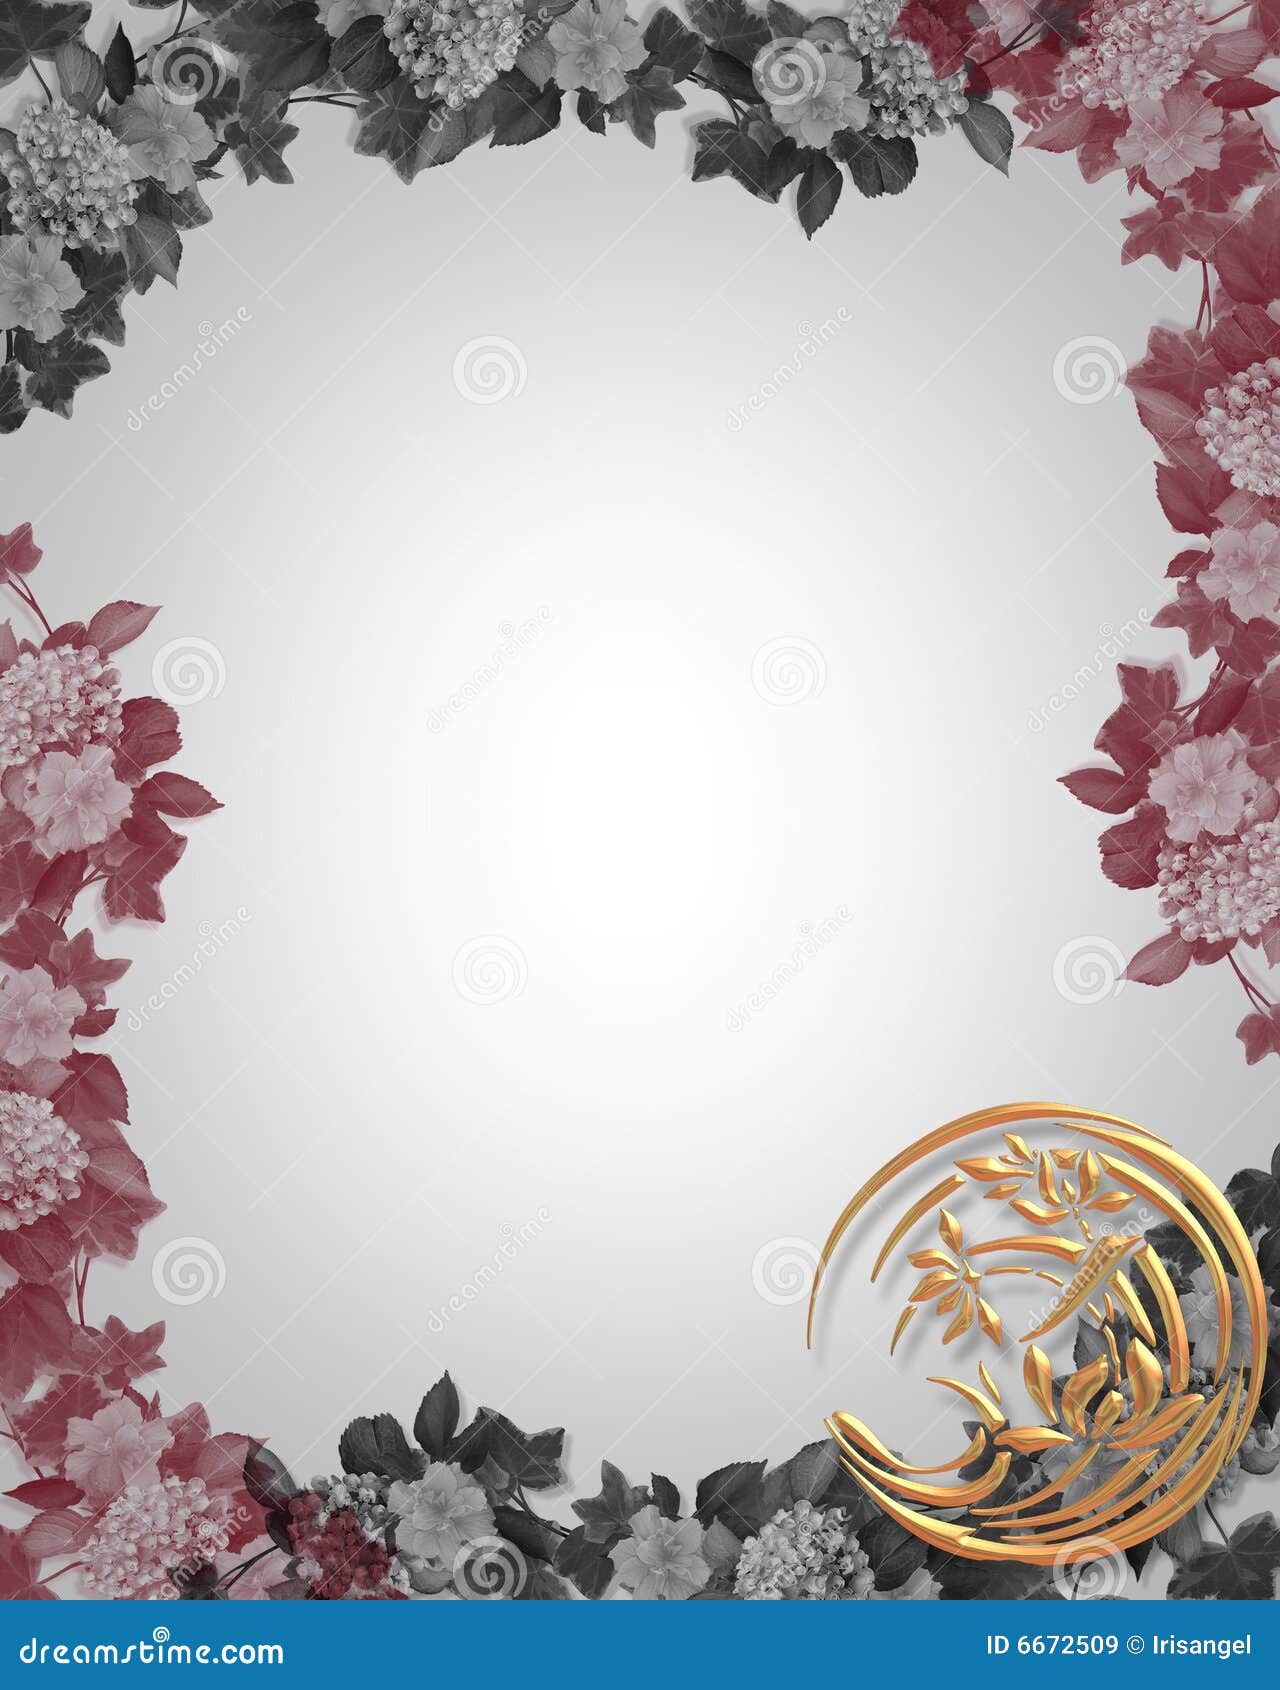 Asian Floral Design Template Royalty Free Stock Images - Image: 66725091130 x 1300